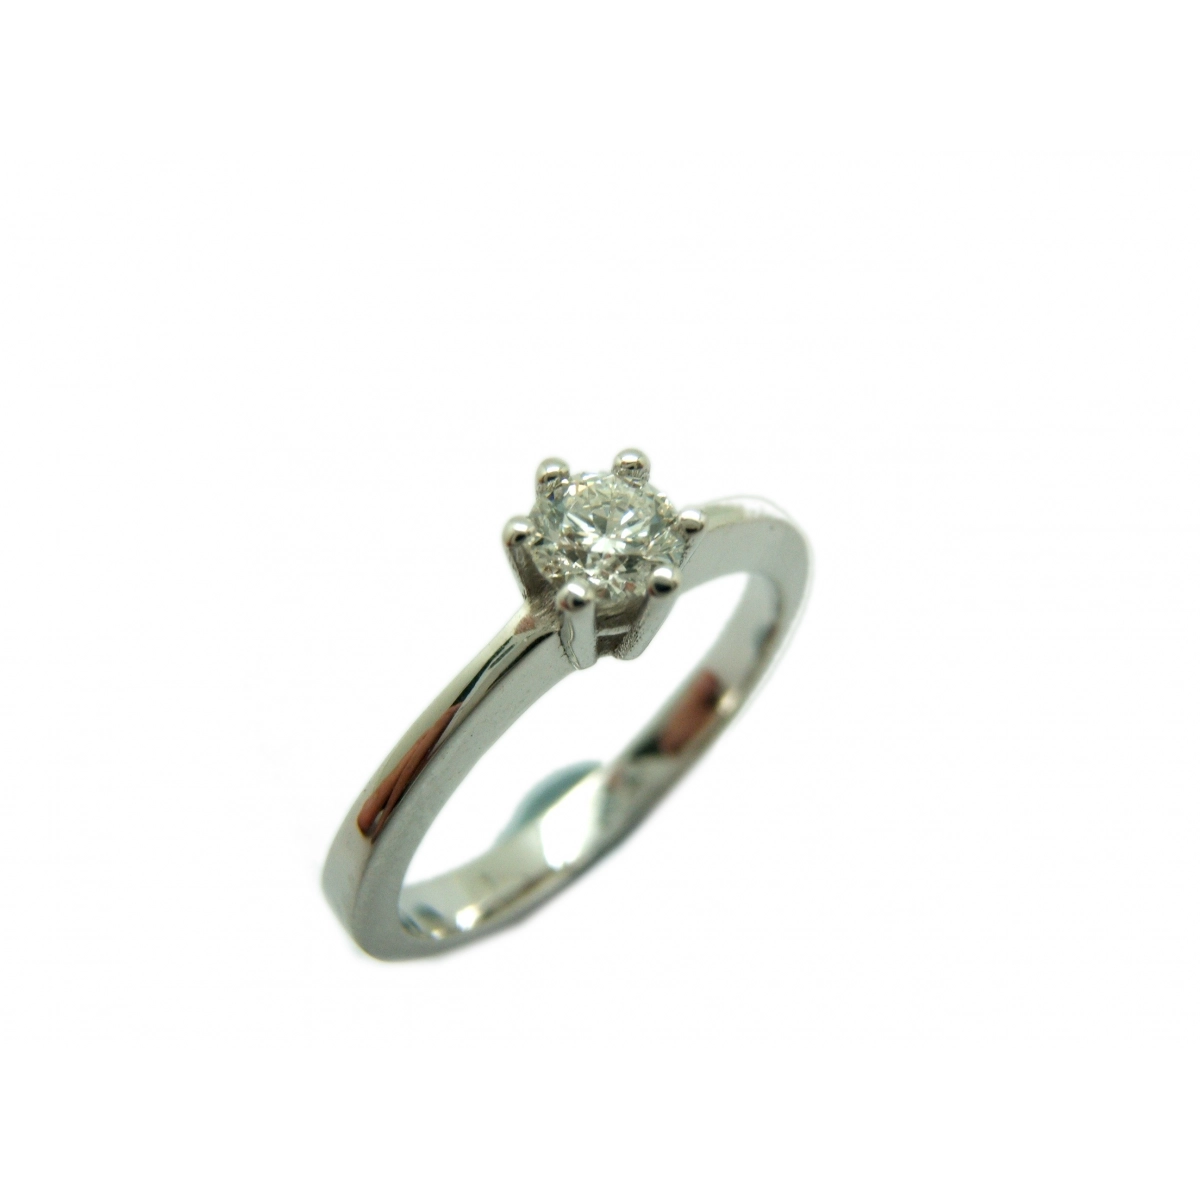 RING SOLITAIRE WHITE GOLD WITH DIAMOND A-405 B-79